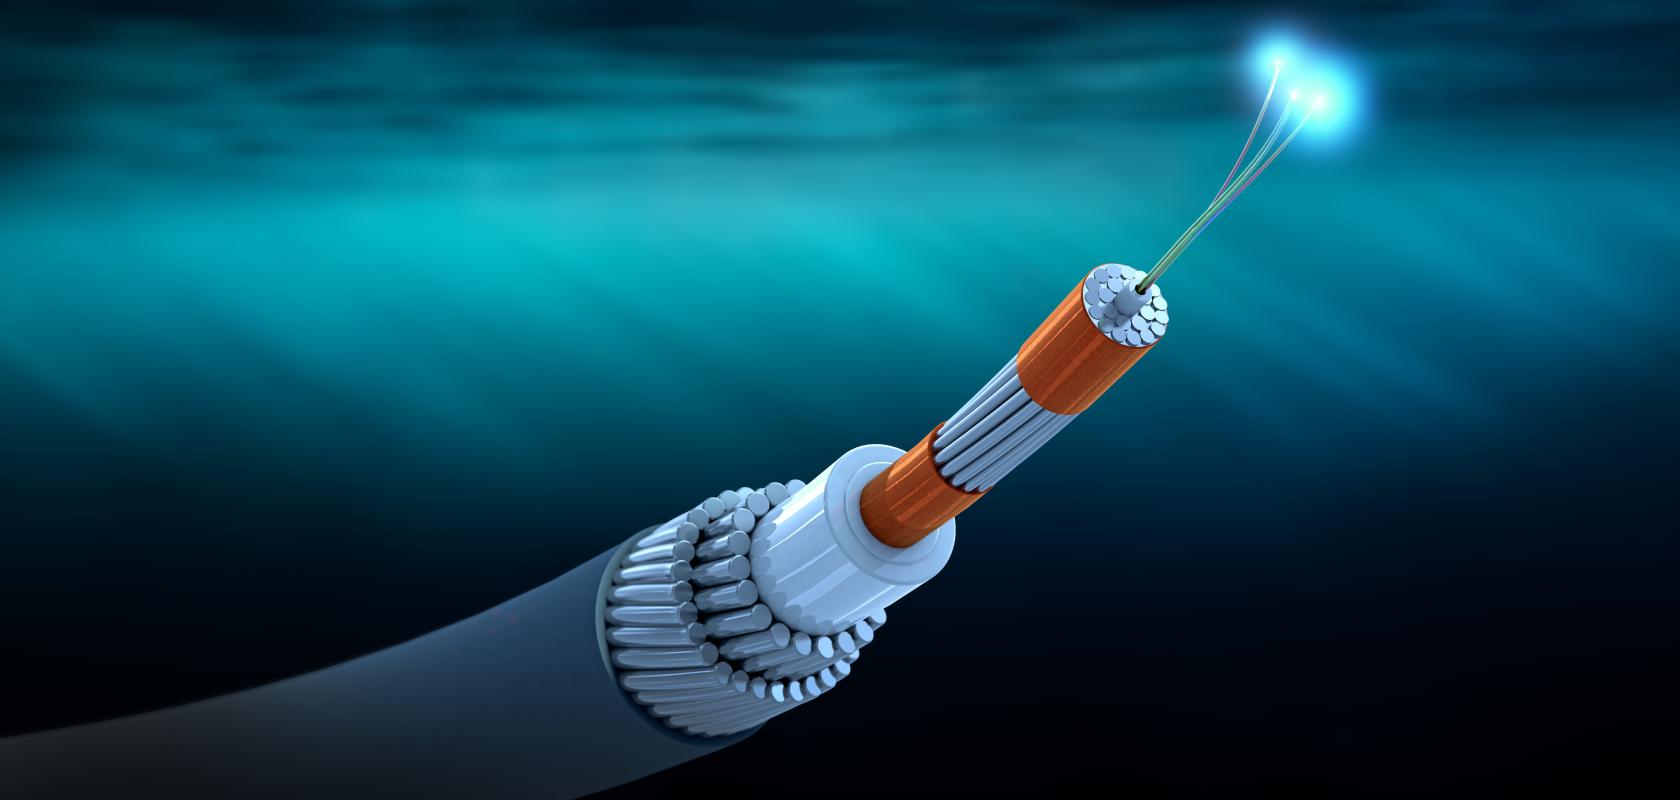 Two new subsea cables will make up Google's central Pacific Connect initiative